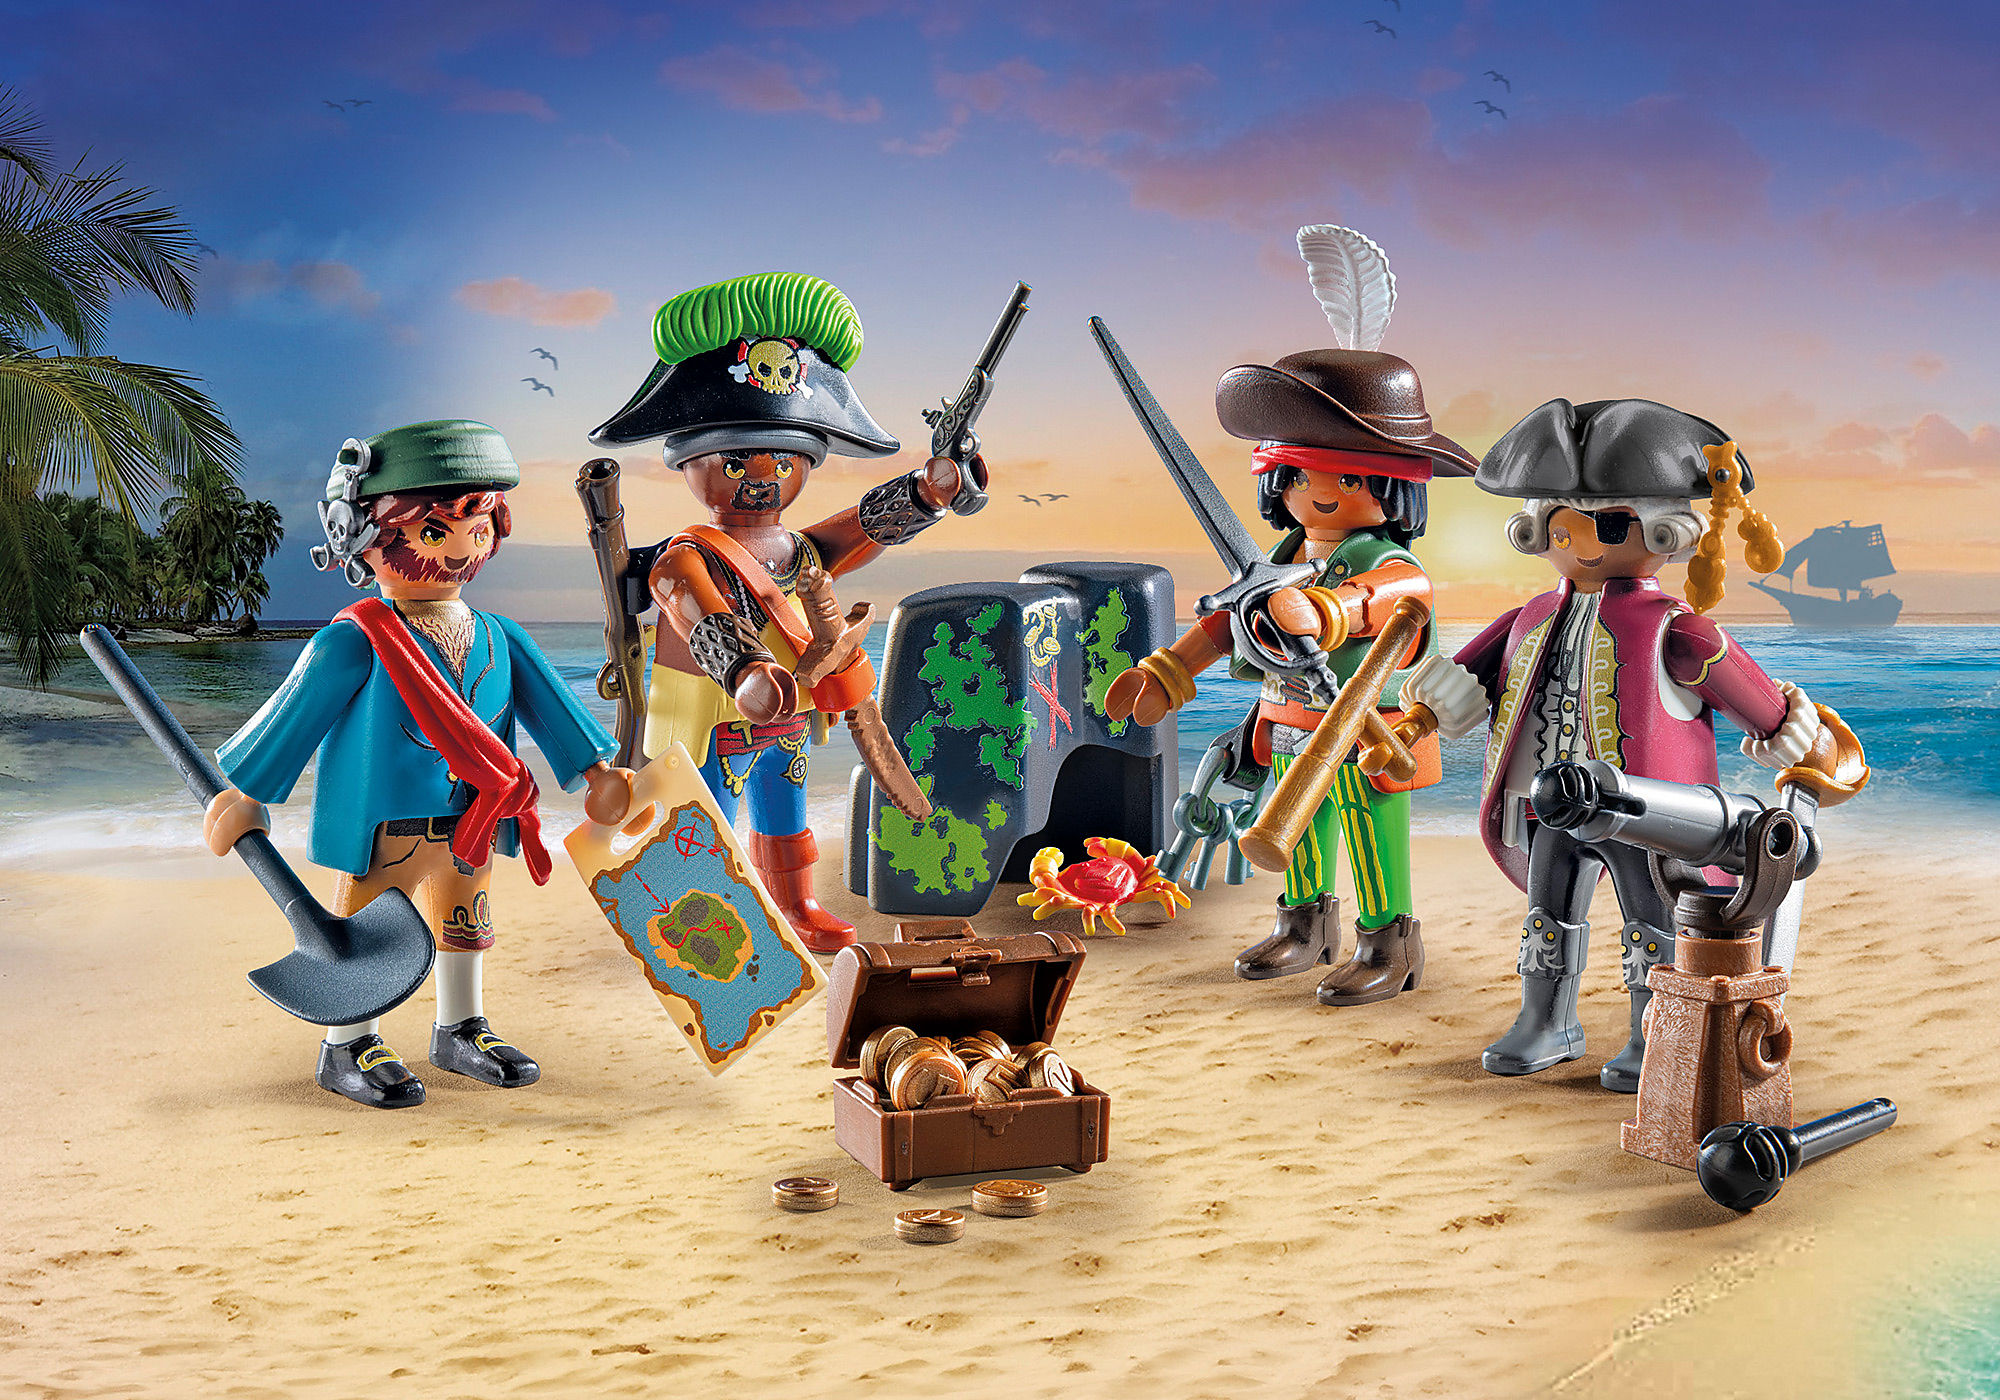 Playmobil Pirate Treasure Island with Rowboat - A2Z Science & Learning Toy  Store